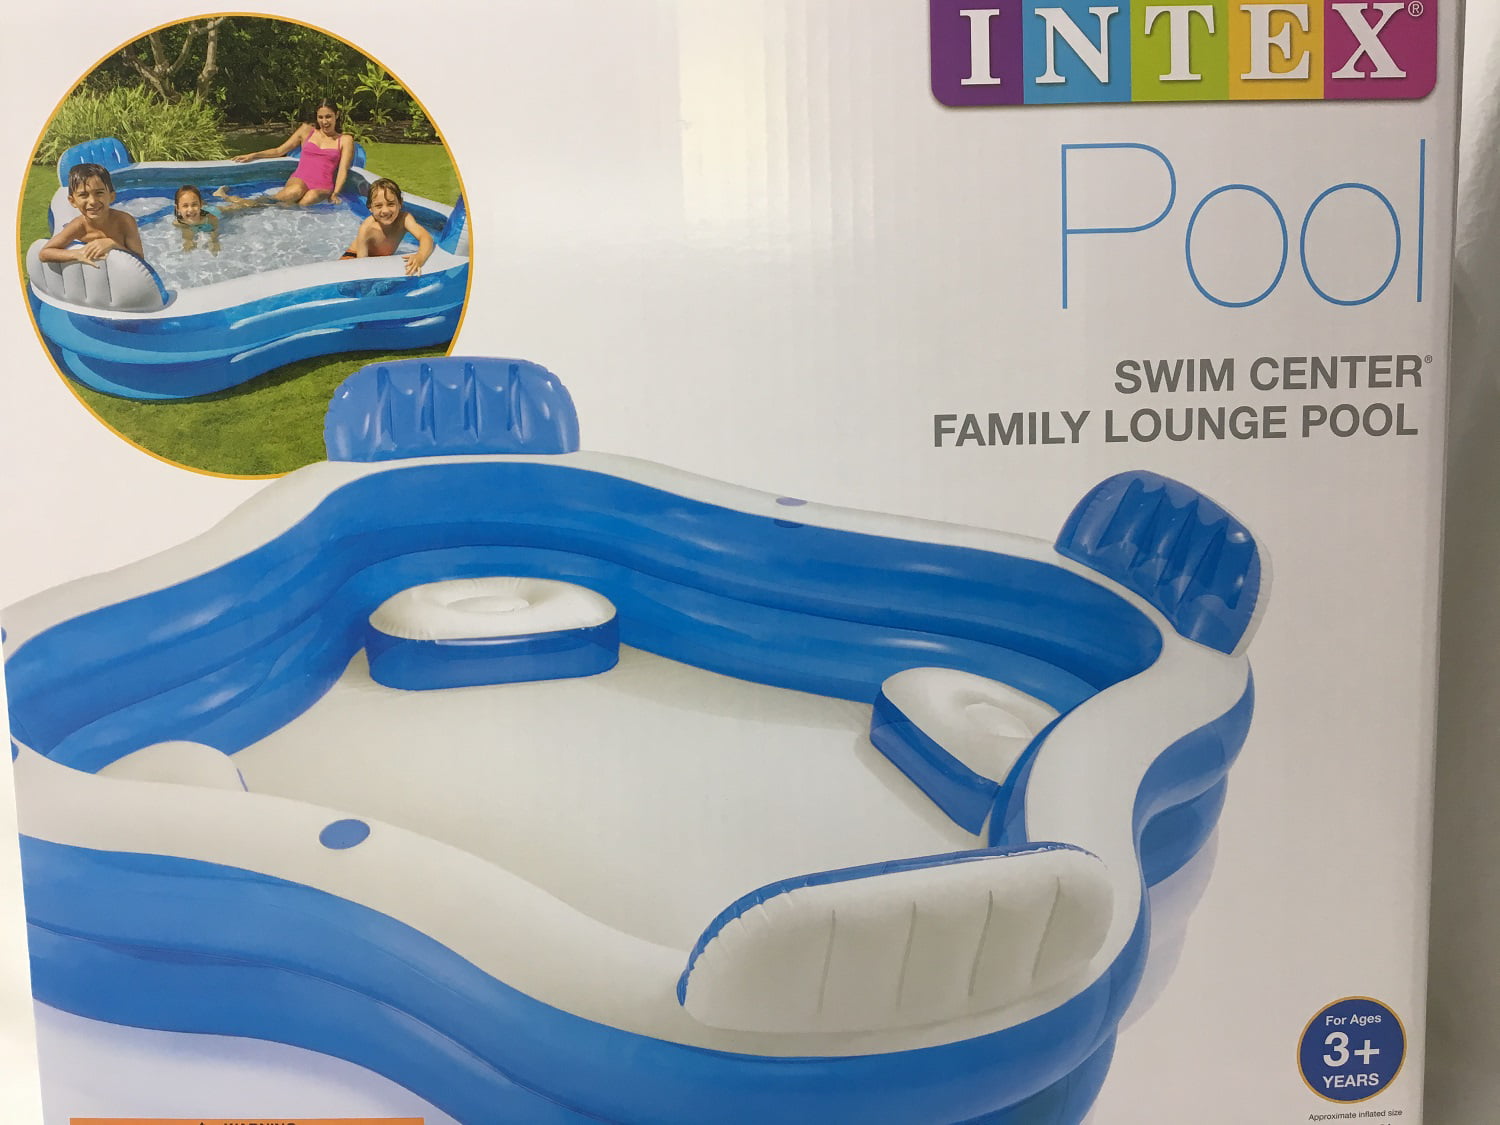 88in X 85in X 30in Intex Swim Center Inflatable Family Lounge Pool for Ages 3+ 